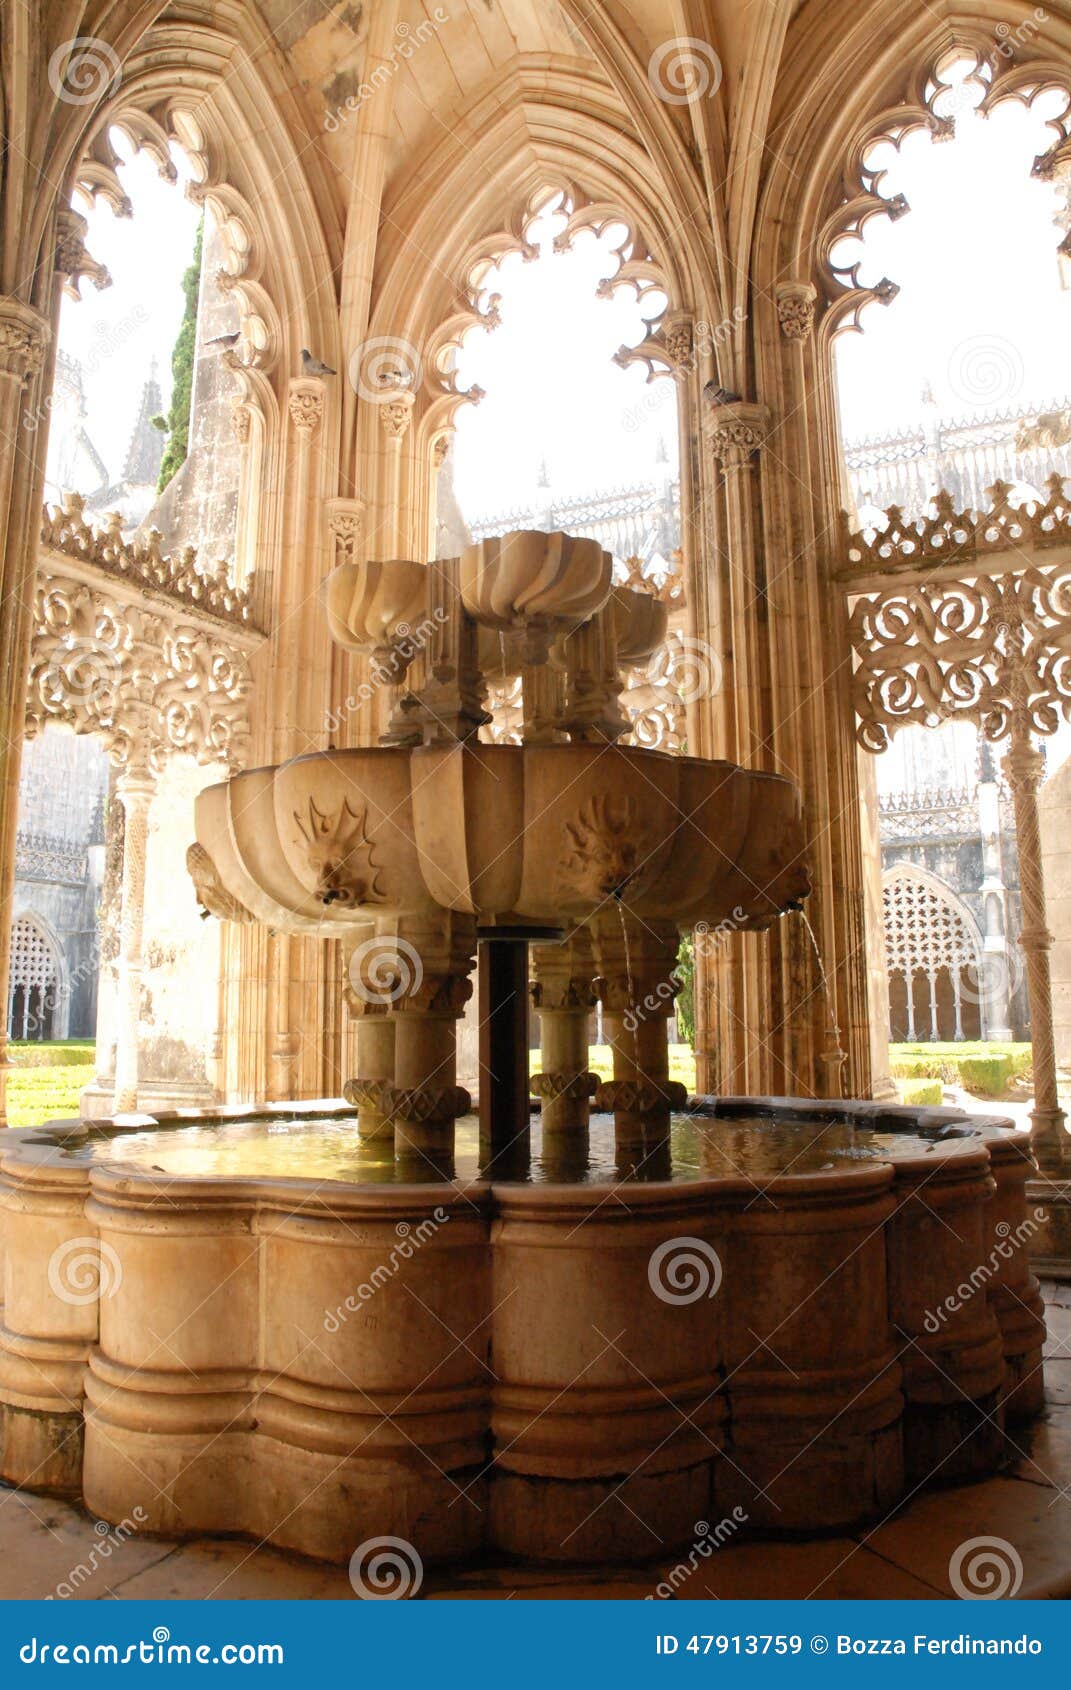 Fountain in the Monastery of Batalha Stock Image - Image of unesco